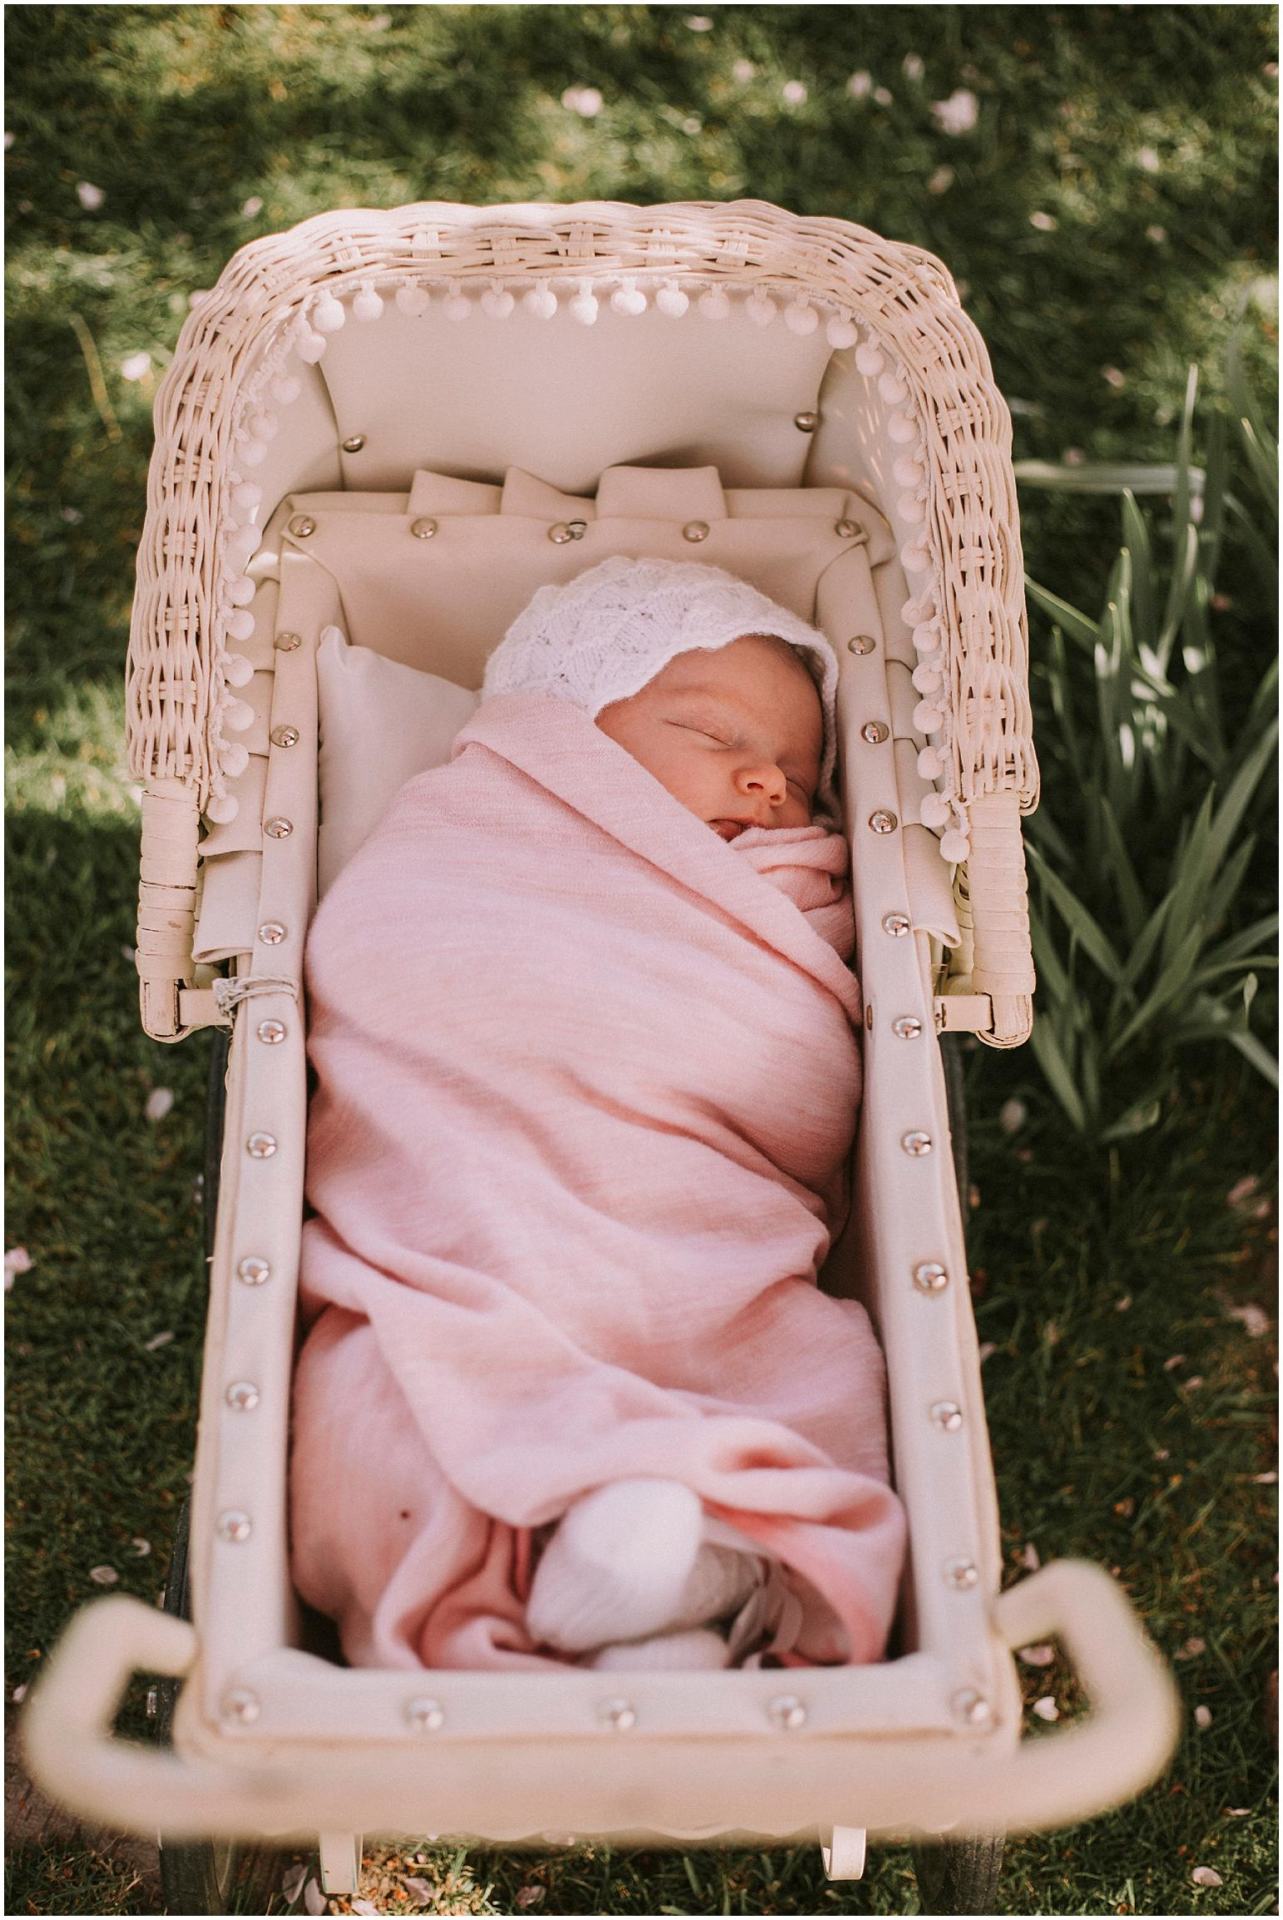 Charlotte Kiri Photography - Family Photography of a cute baby girl sleeping in the dappled light in the garden, swaddled in a pink blanket in a wicker pram with tassels and silver fastenings in Wanaka, New Zealand.